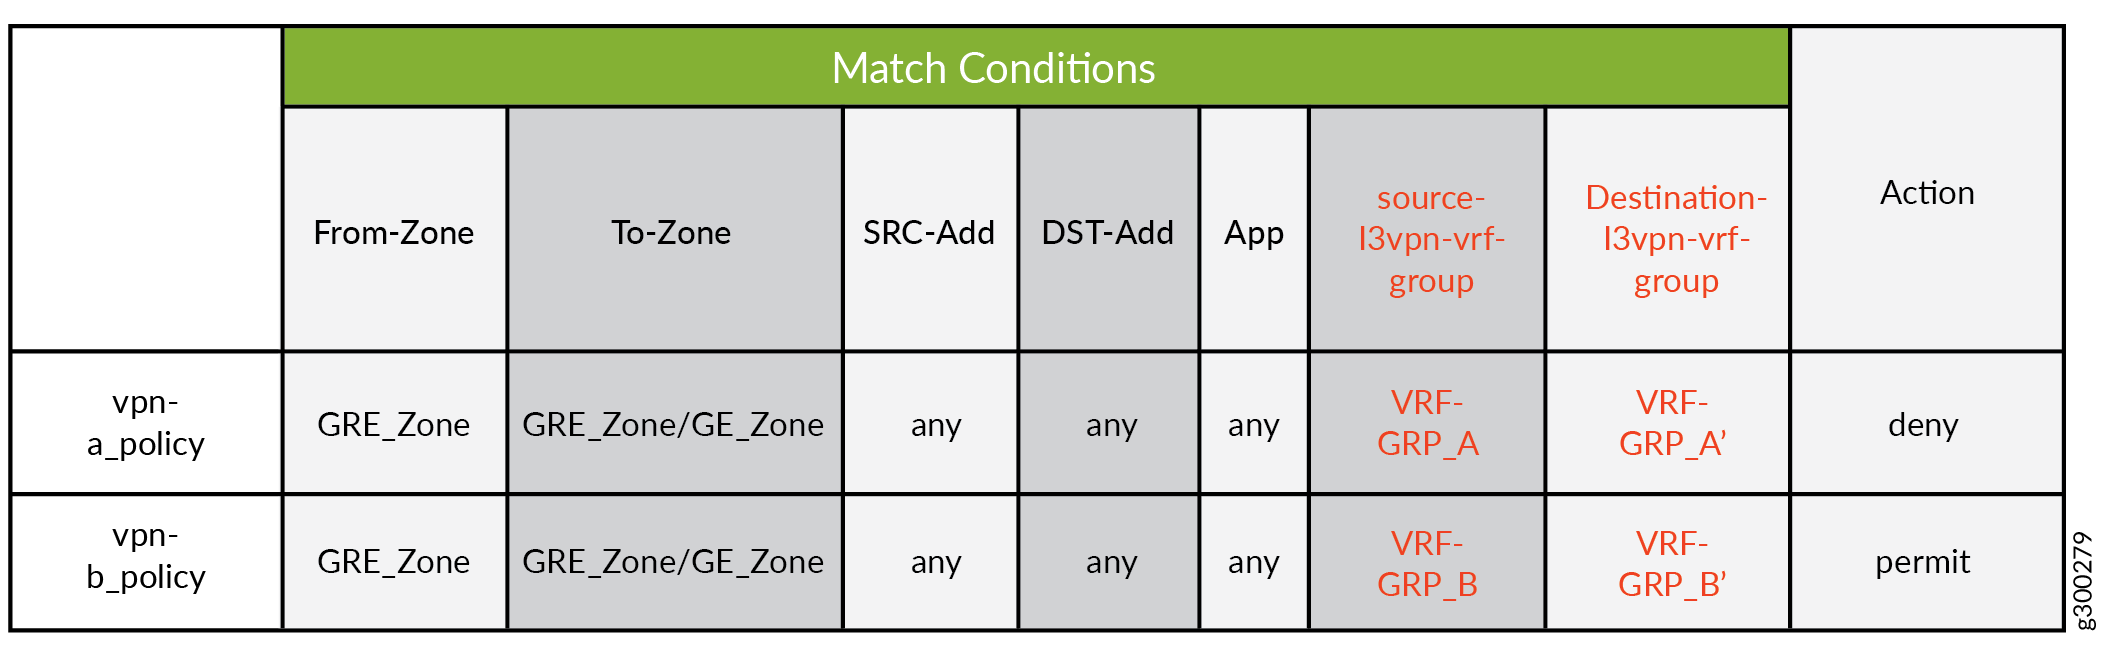 Match Conditions with VRF group